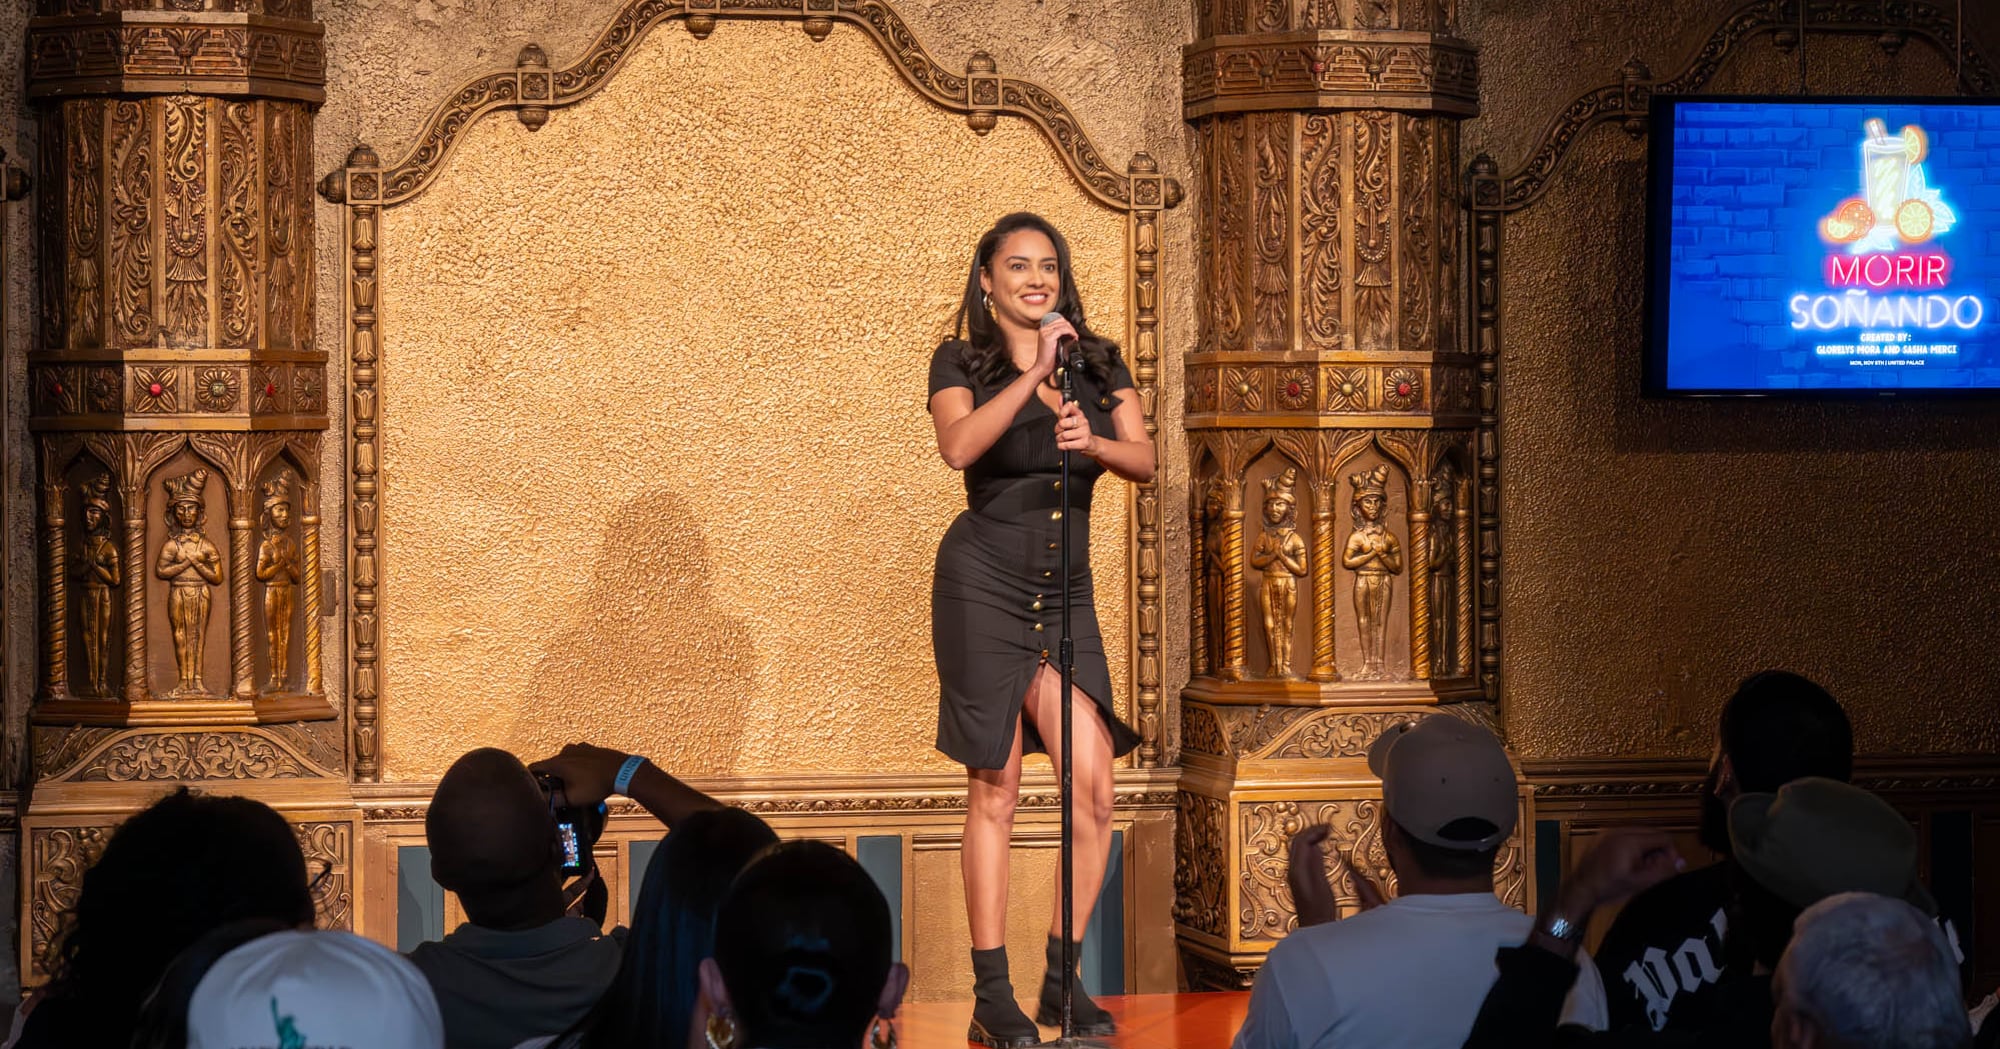 Morir Soñando Makes History as the United Palace's First All&Dominican Comedy Show